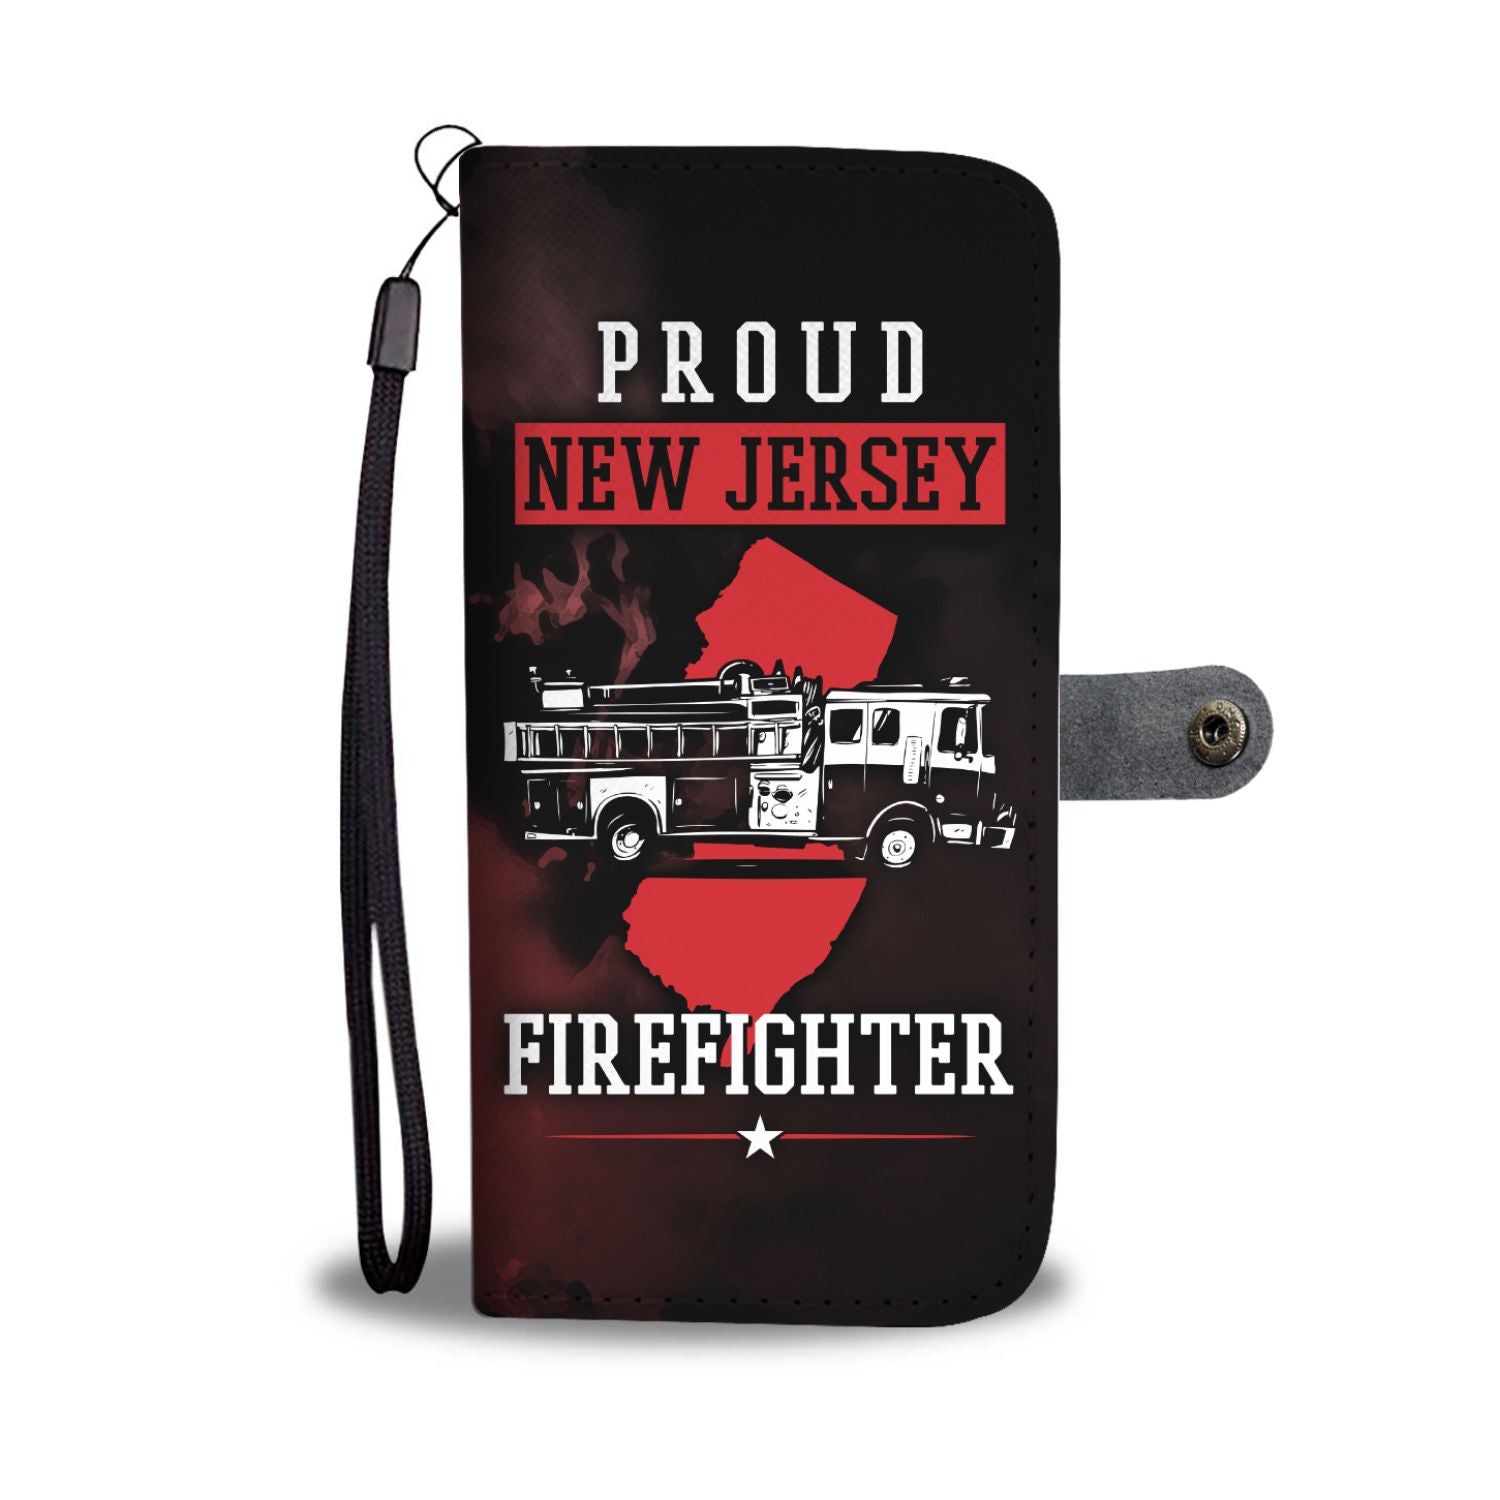 New Jersey Firefighter Wallet Phone Case